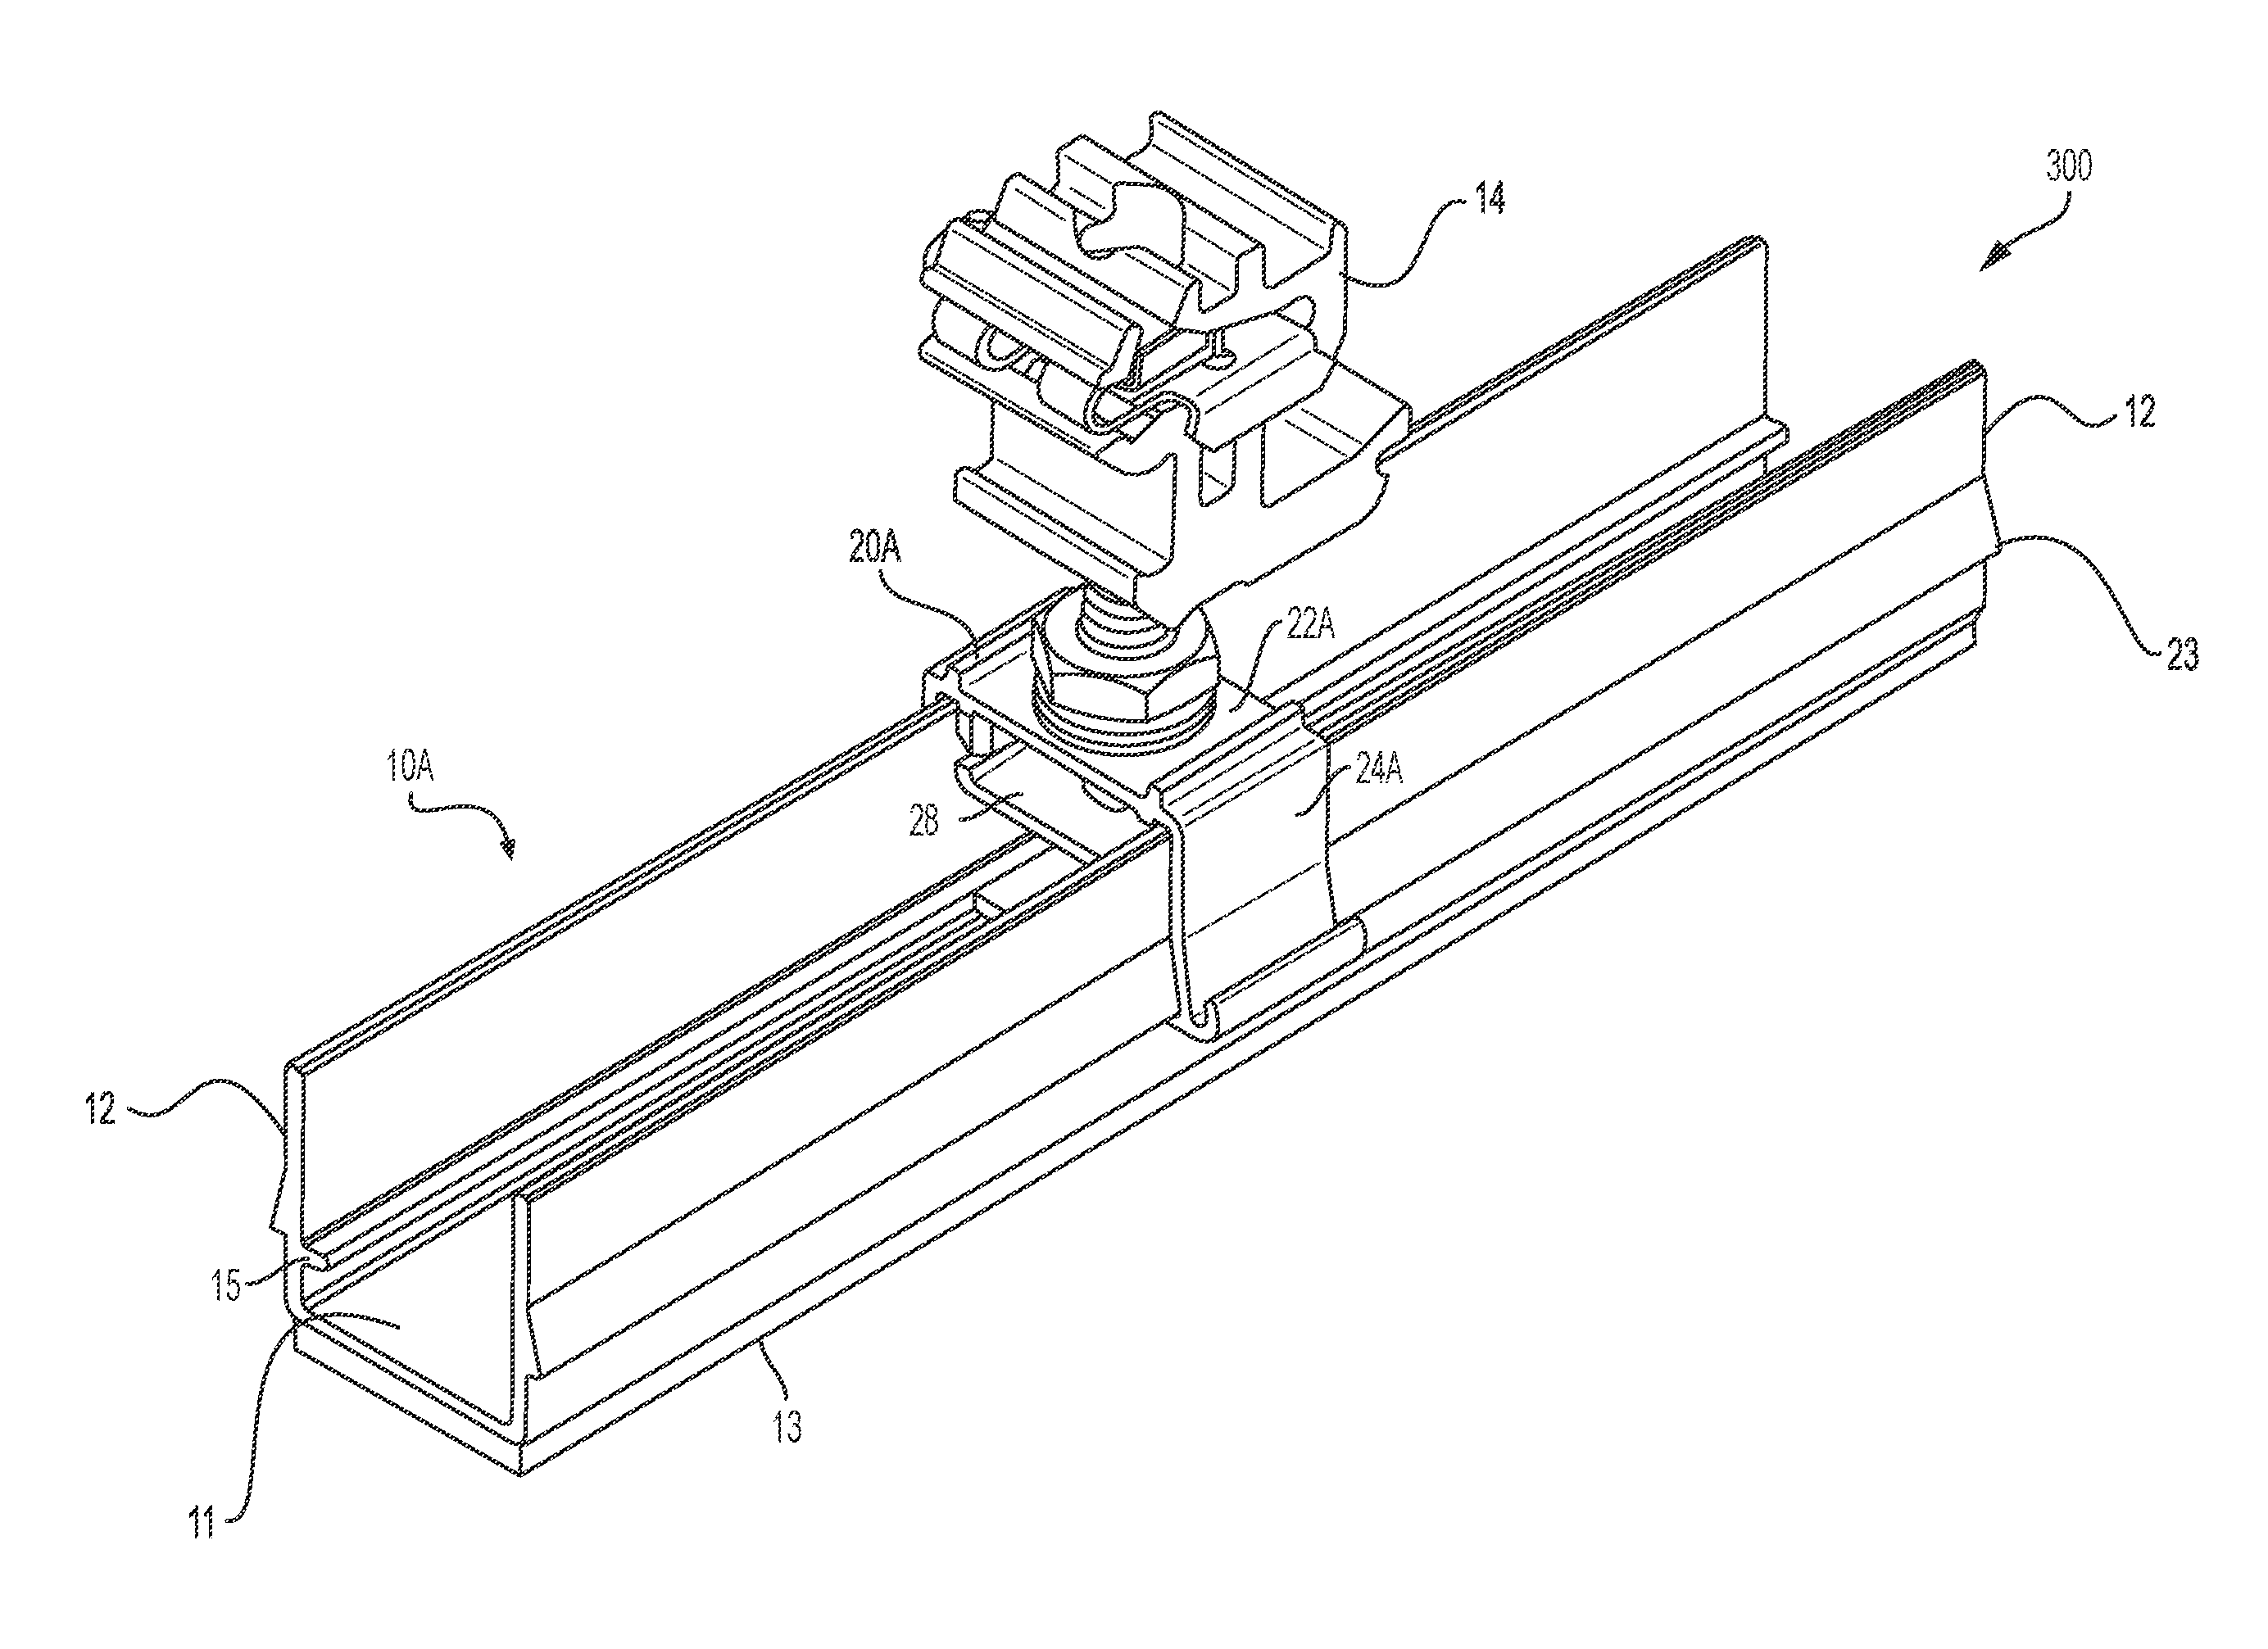 Photovoltaic mounting system